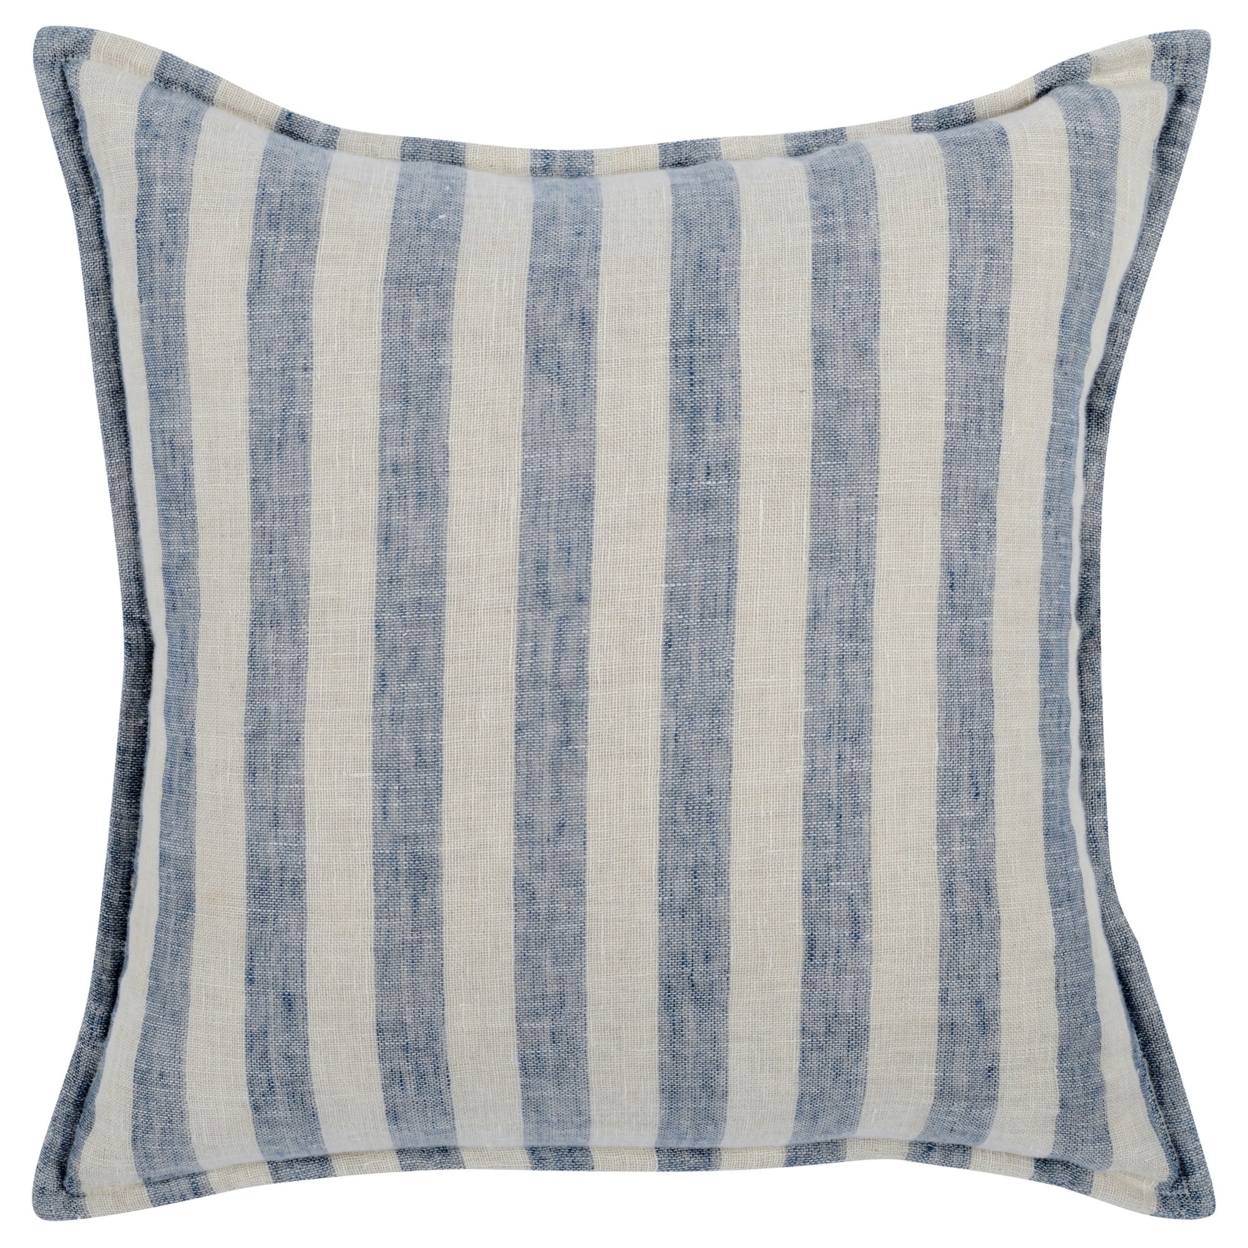 18 X 18 Throw Pillow, Linen Cover, Woven Stripes, Flanges, Blue And White, Saltoro Sherpi